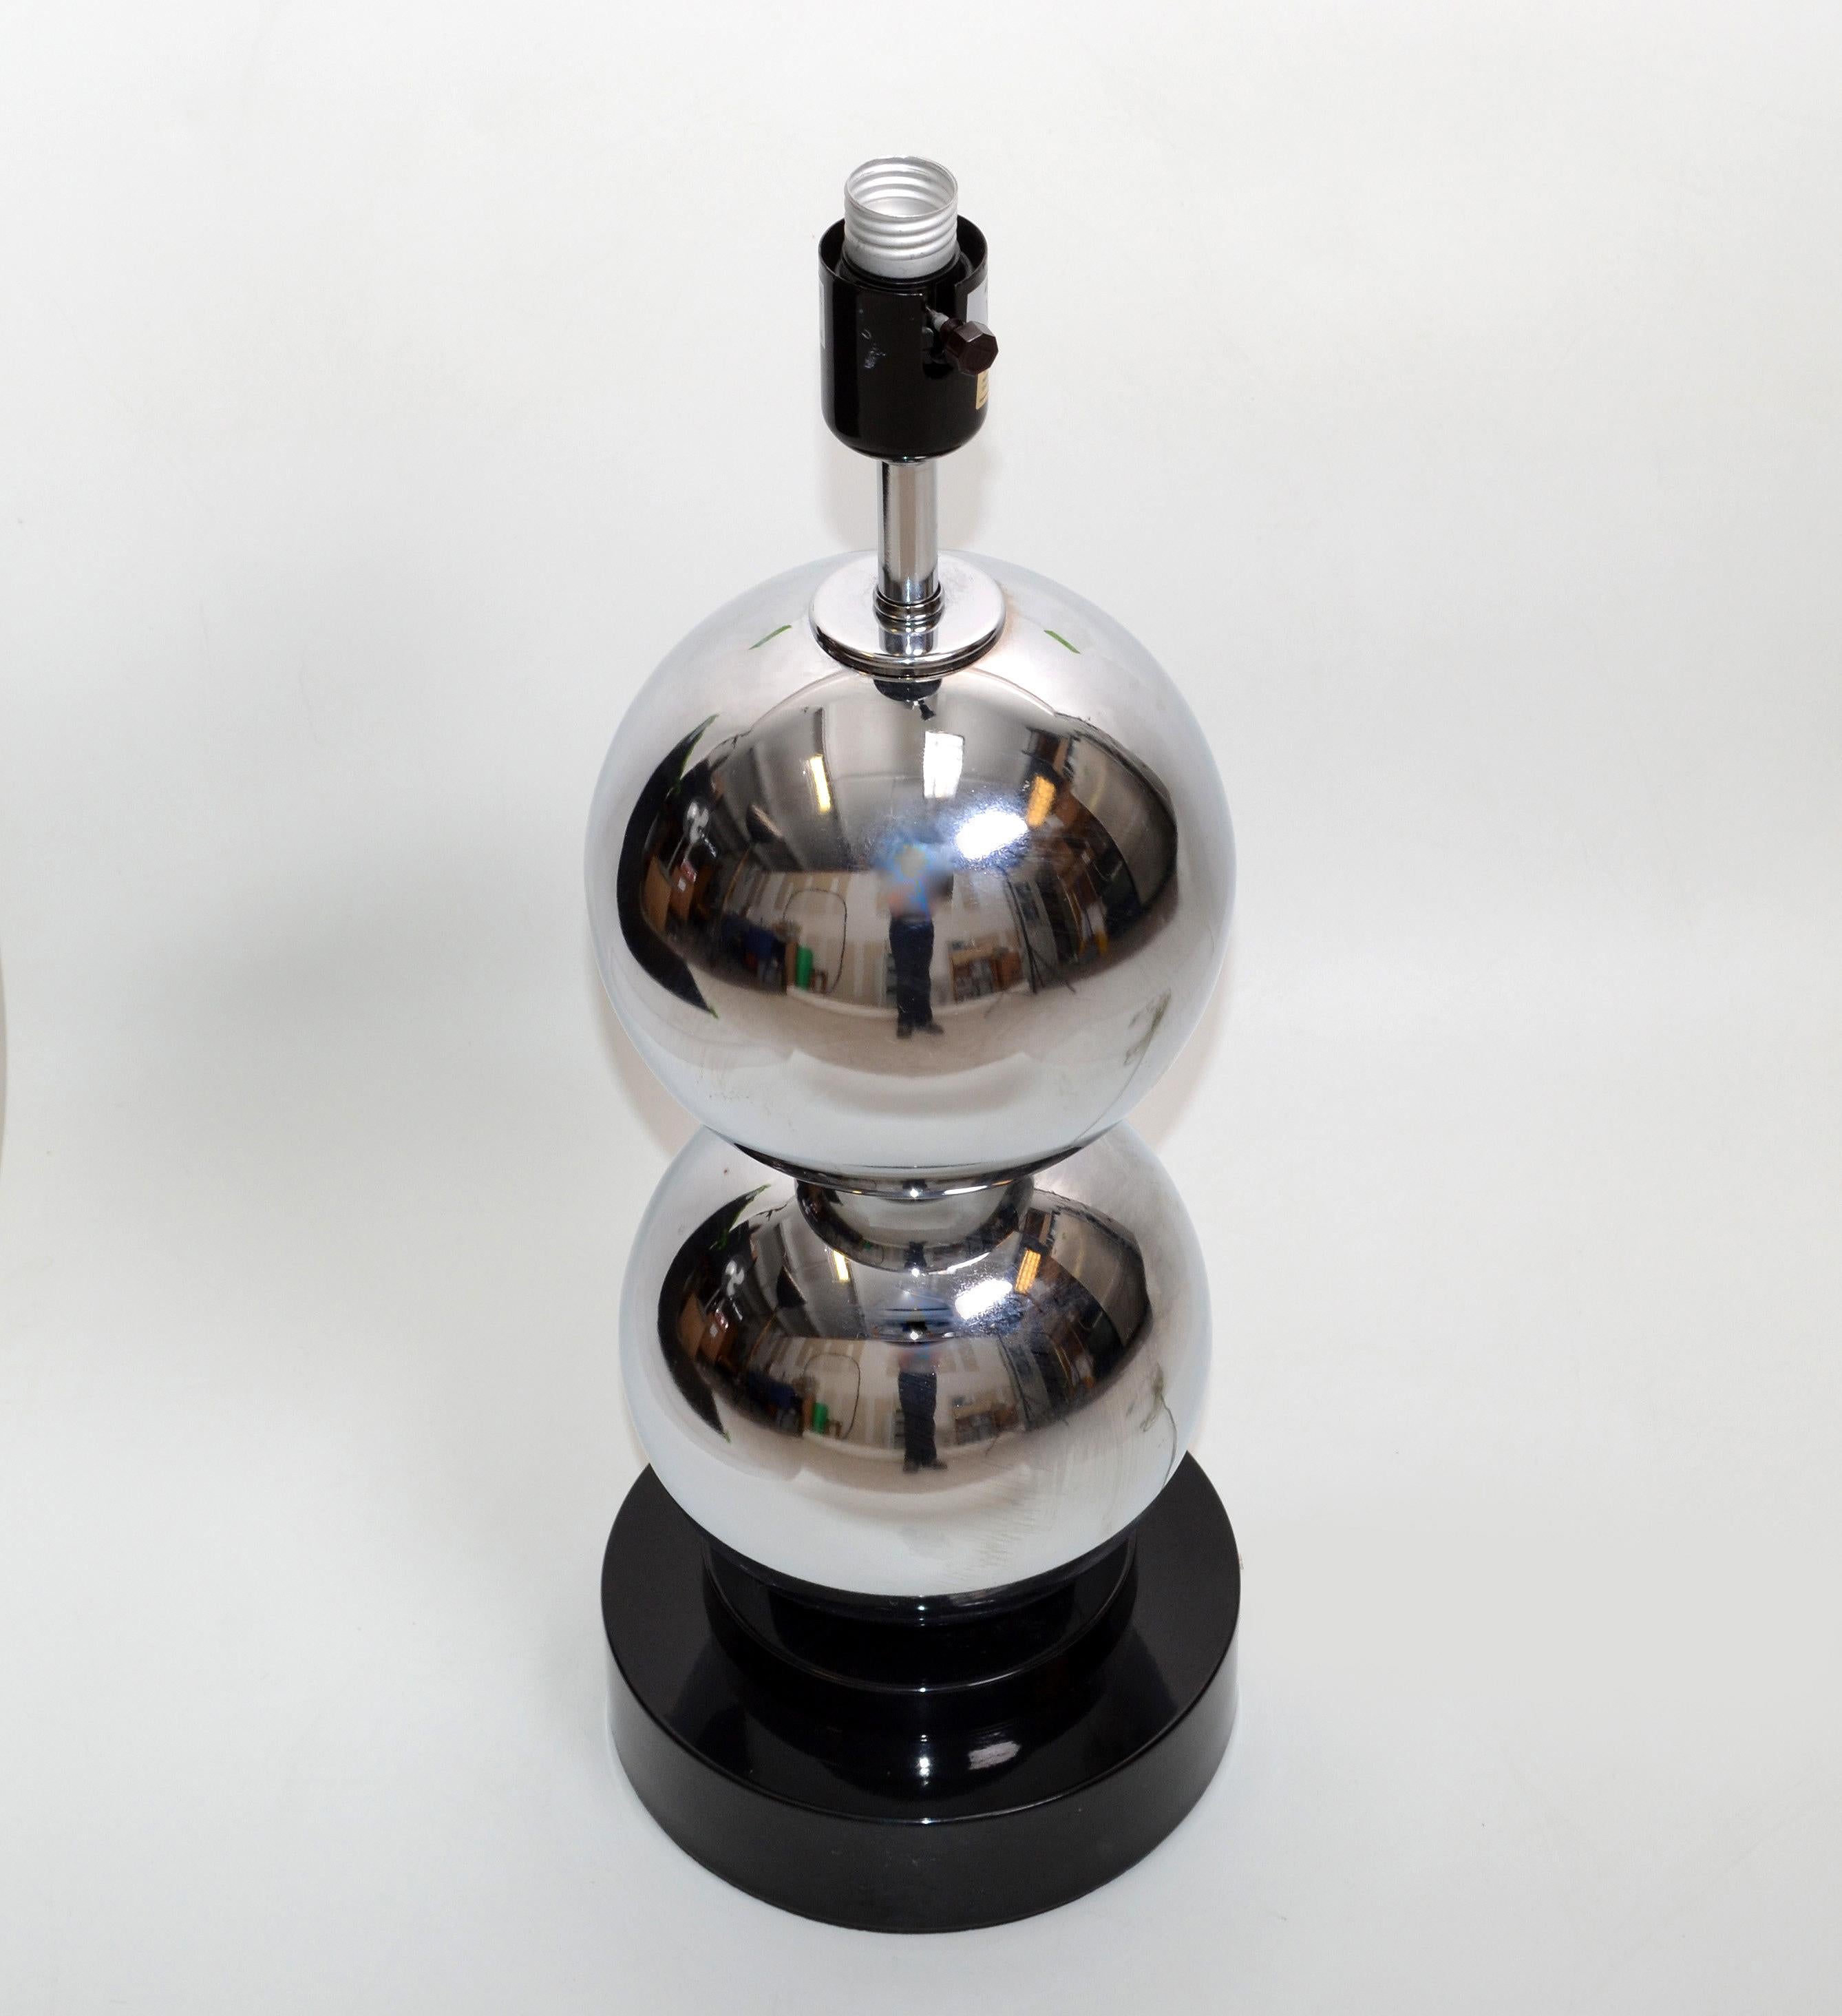 Van Teal modernist two ball silver finish contemporary table lamp.
US Rewired & UL listed has 3-way function and takes a 3-way 150 watt bulb. LED work perfectly too.
Foil label at the socket.
No Shade.